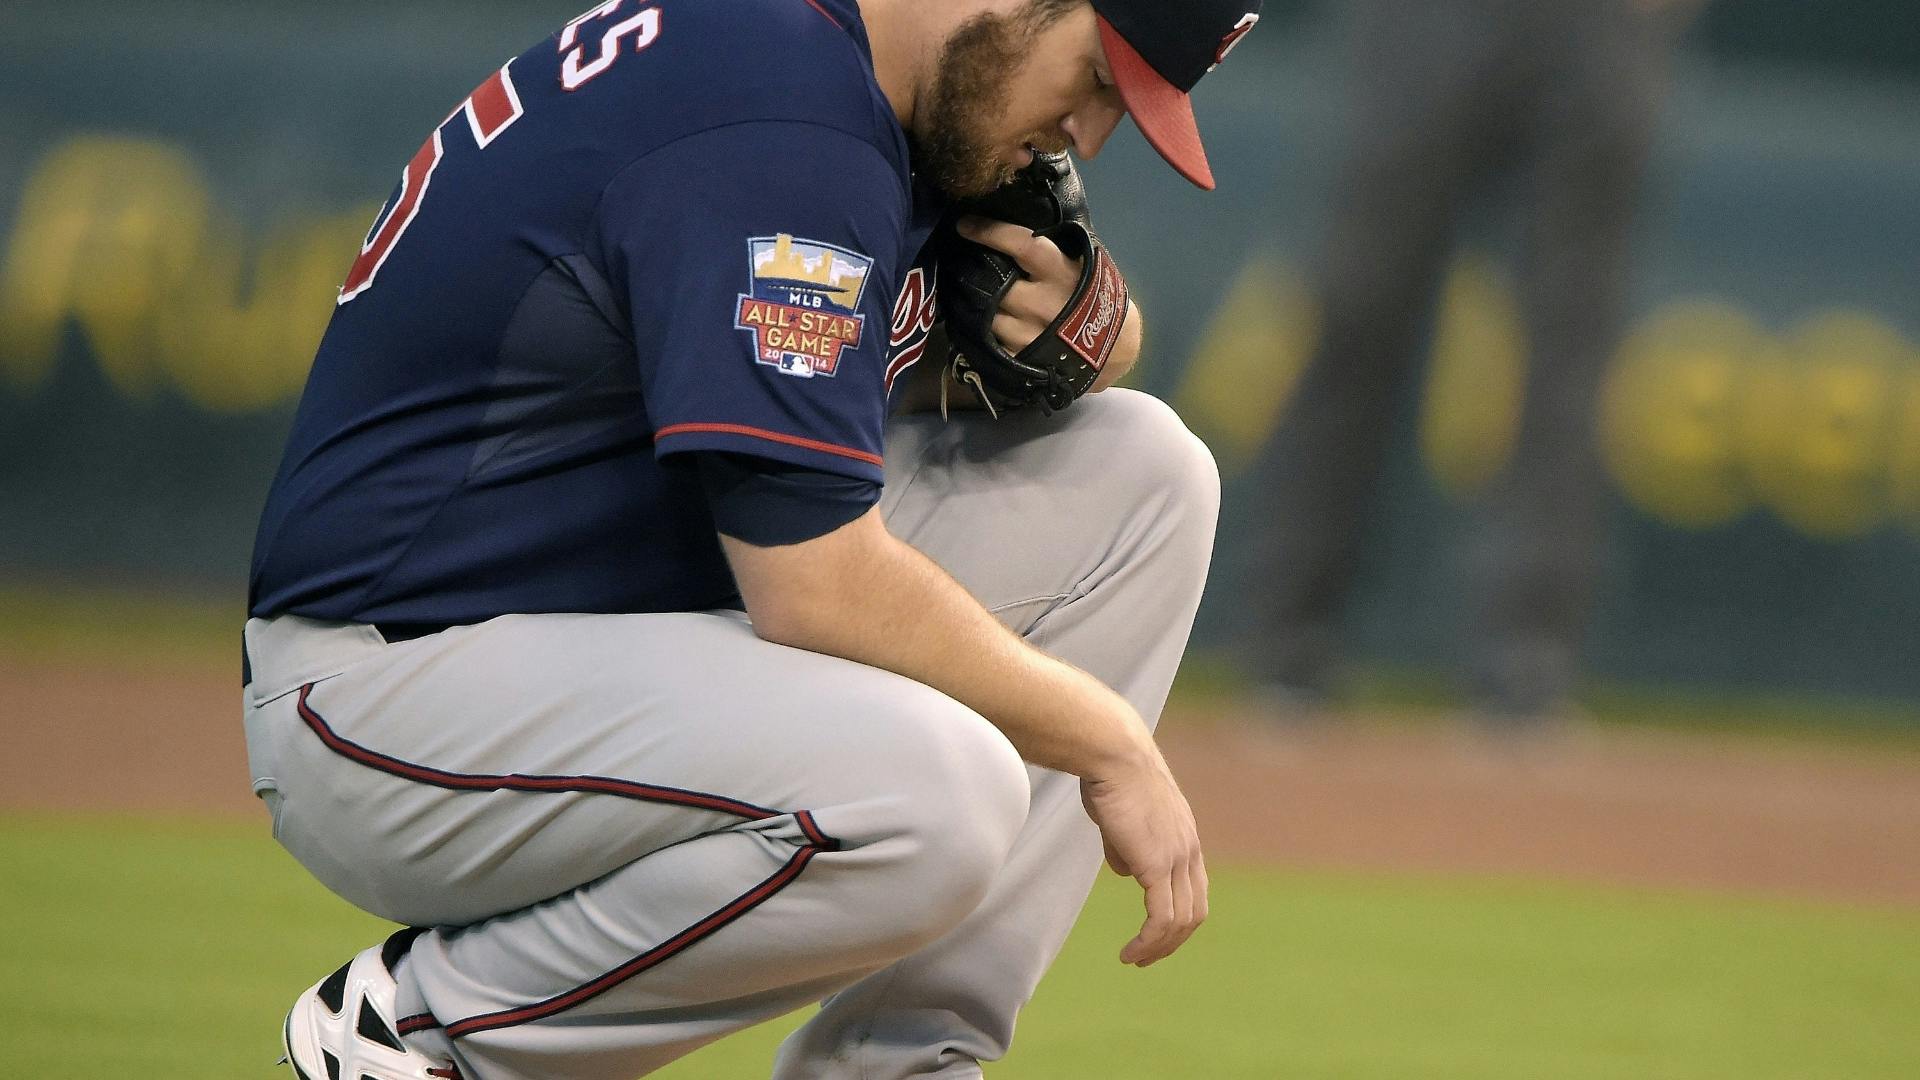 Twins righthander Phil Hughes said he was disappointed he wasn't able to protect a 1-0 lead, because he pitched well for seven innings Wednesday.